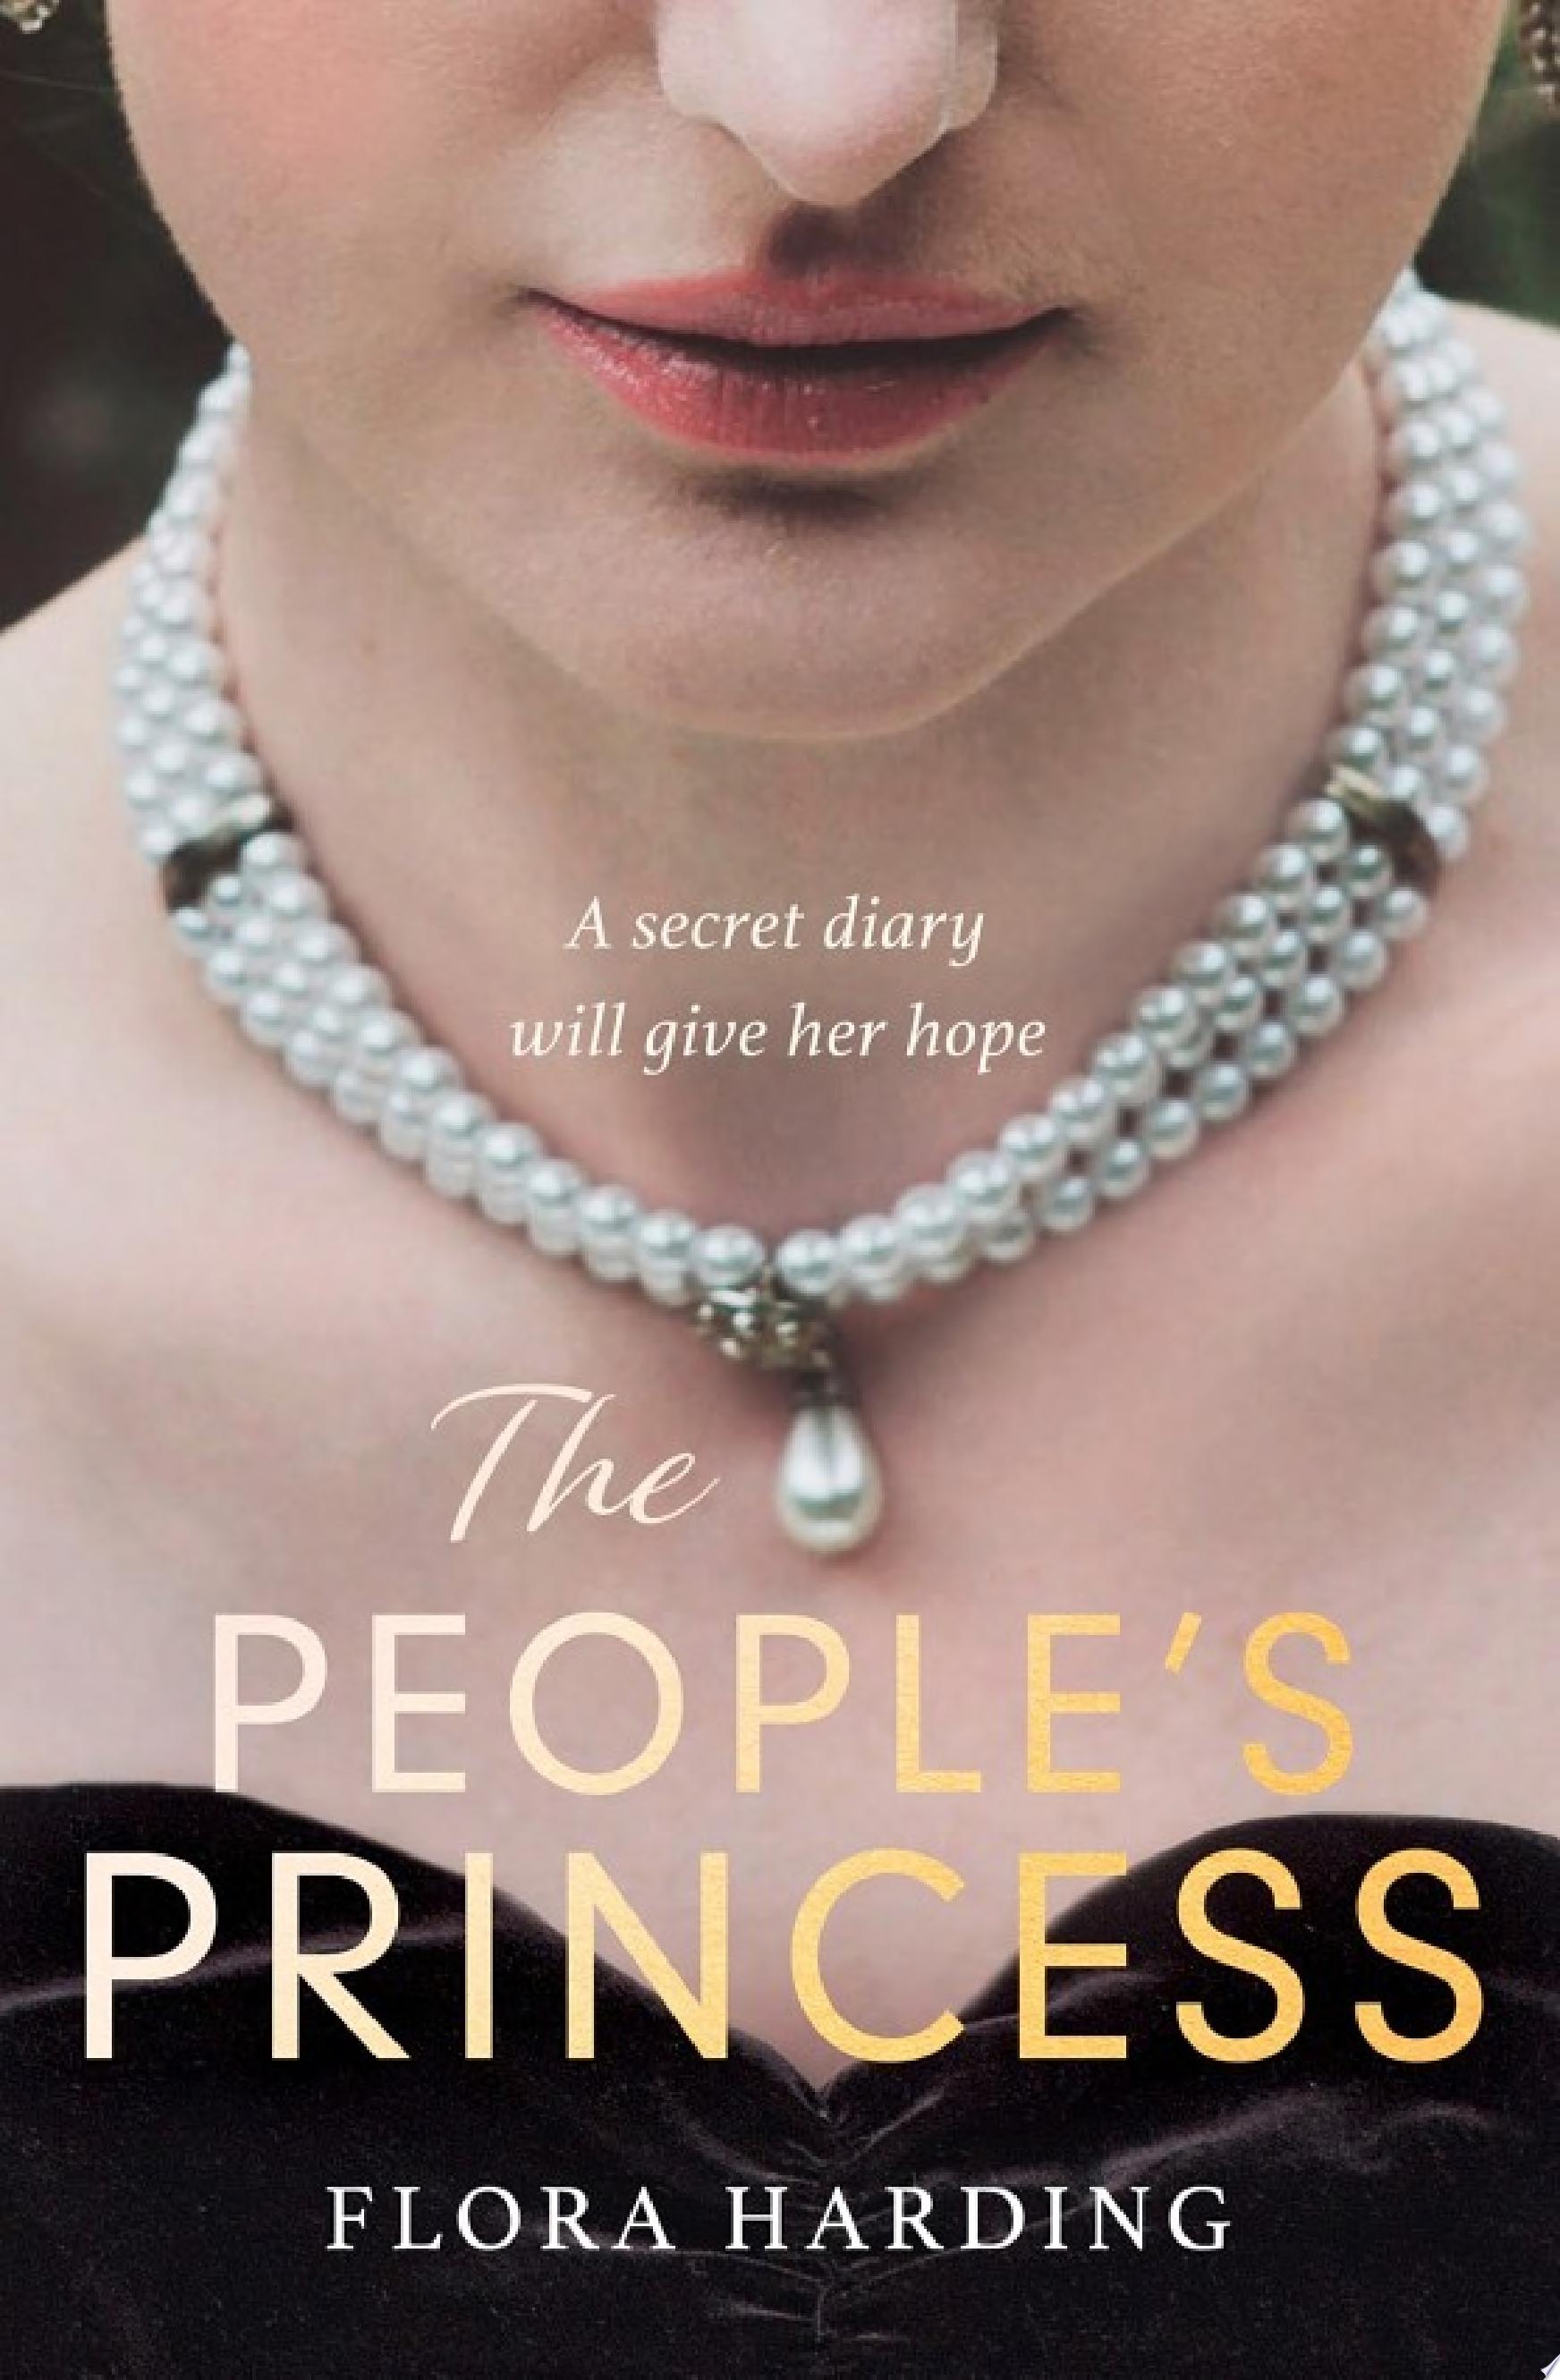 Image for "The People’s Princess"